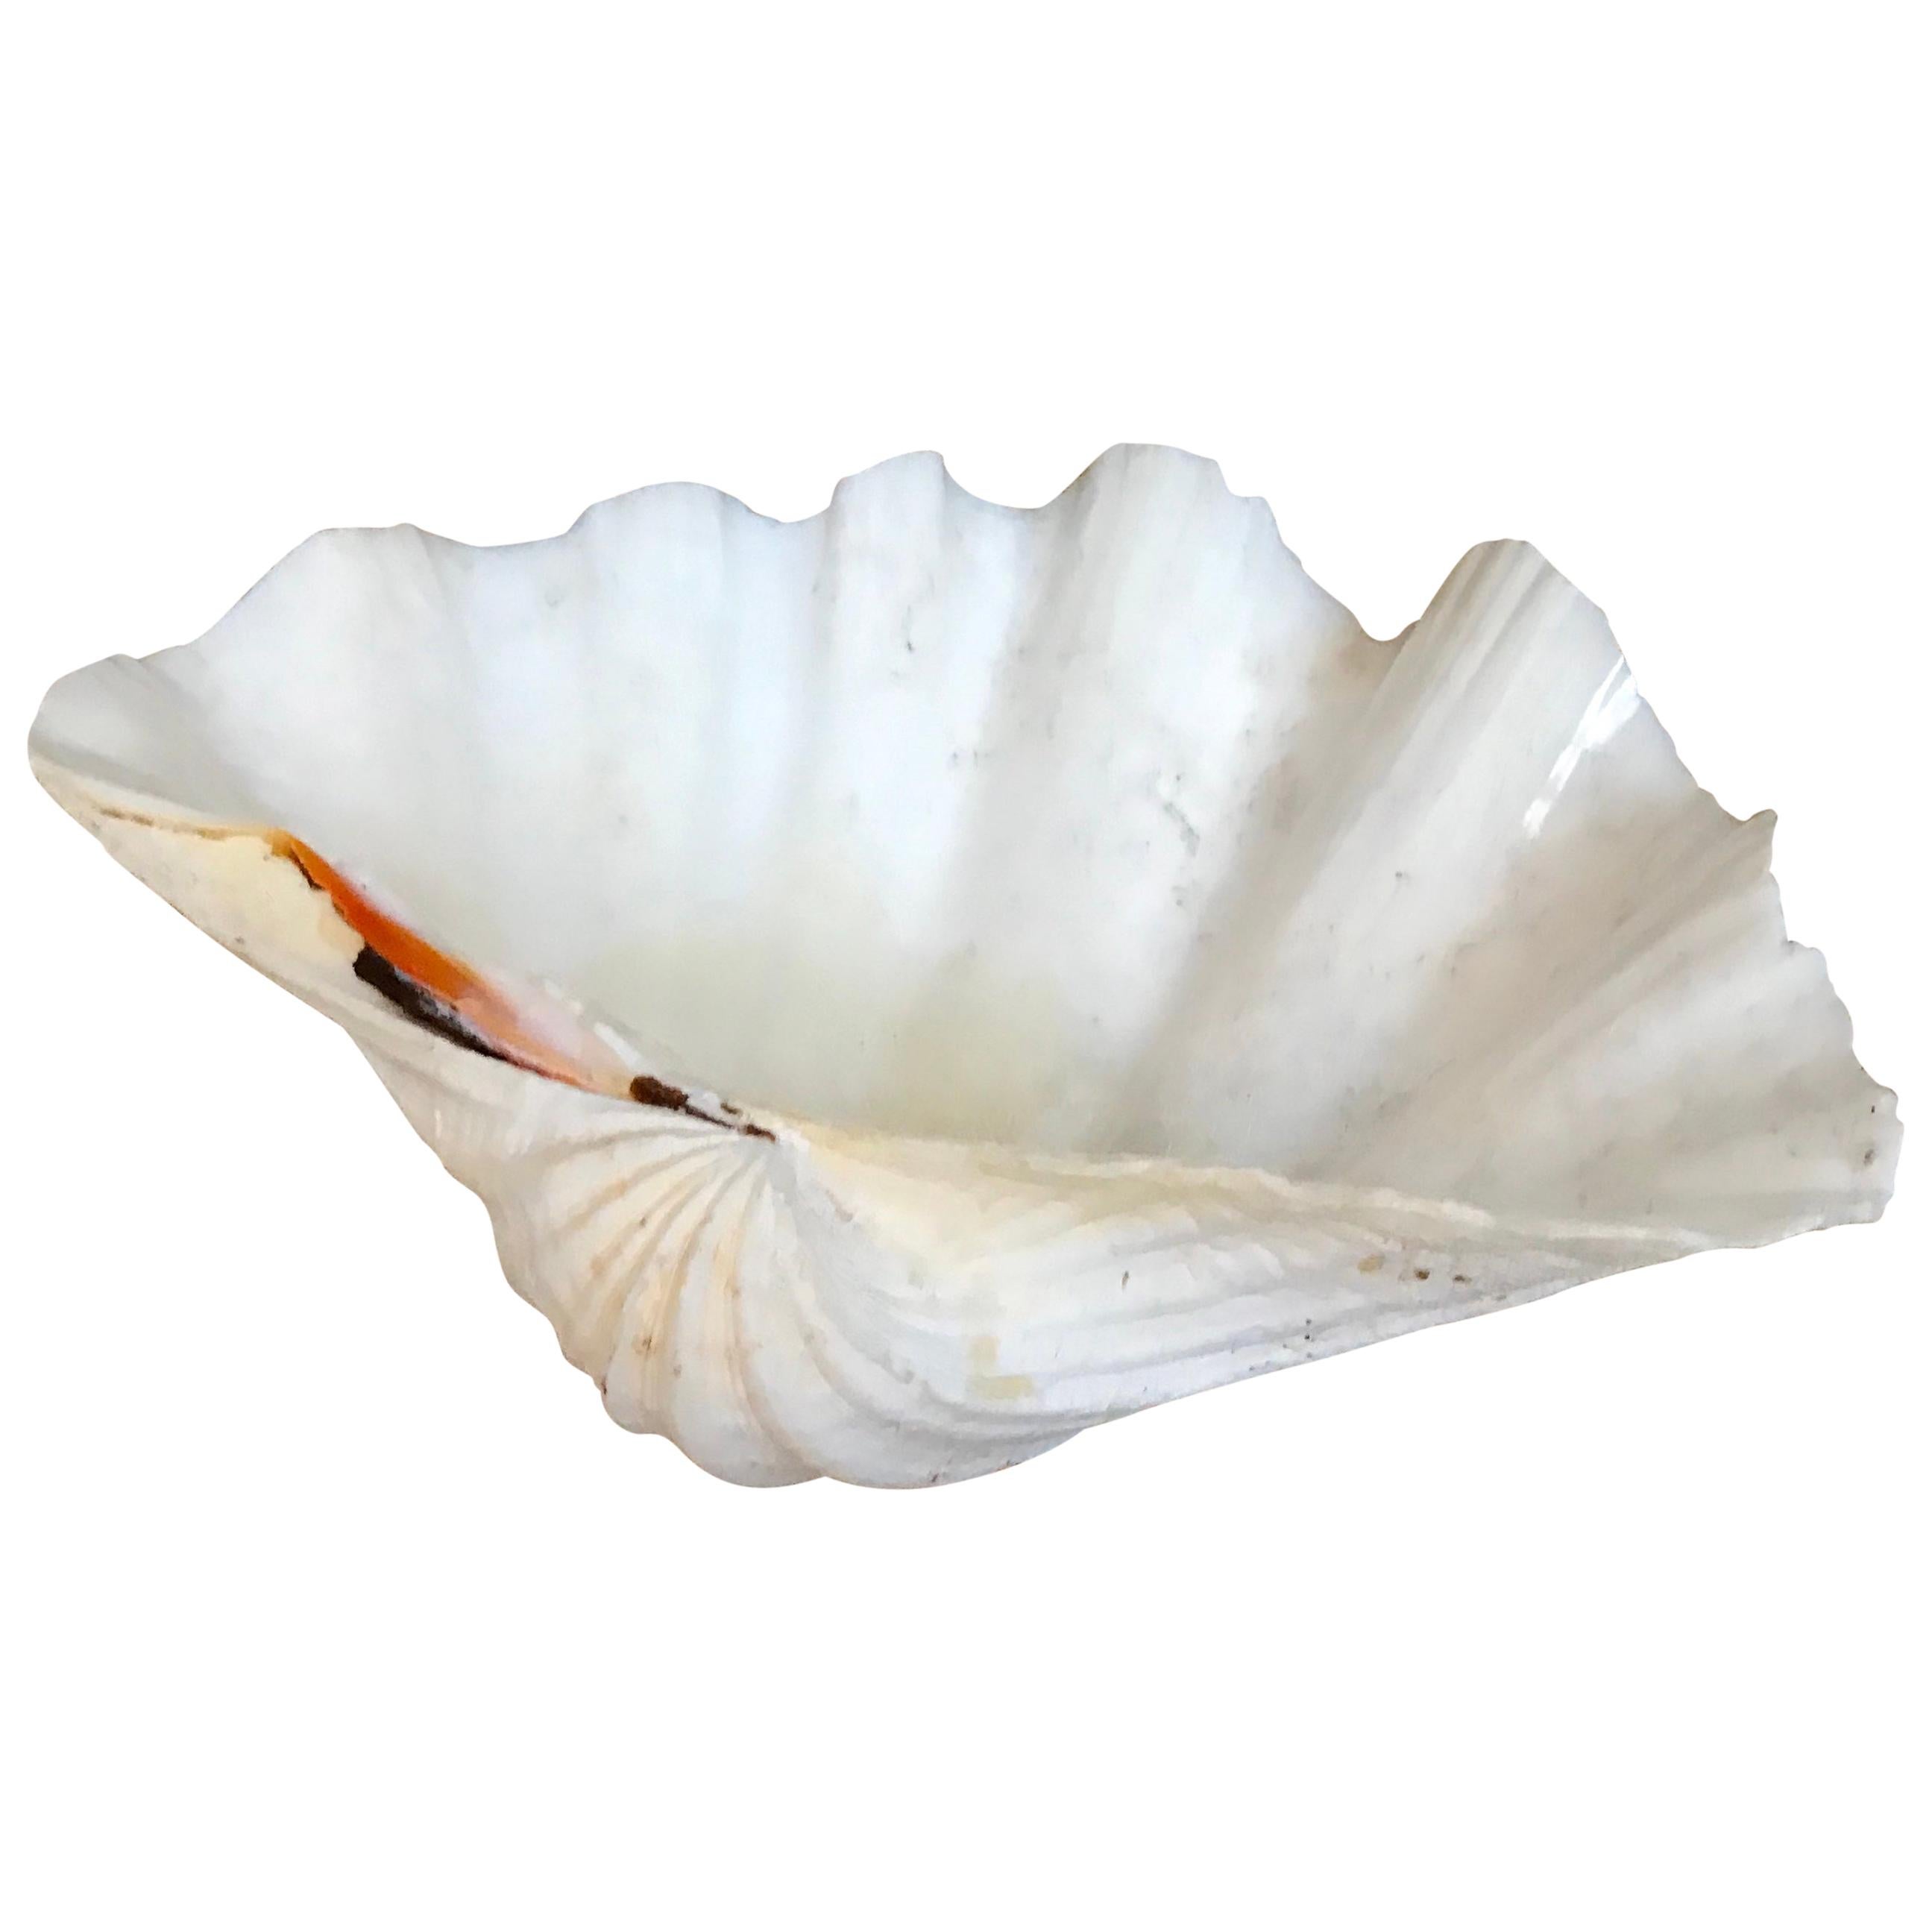 Large South Pacific Tridacna Gigas Clam Shell For Sale